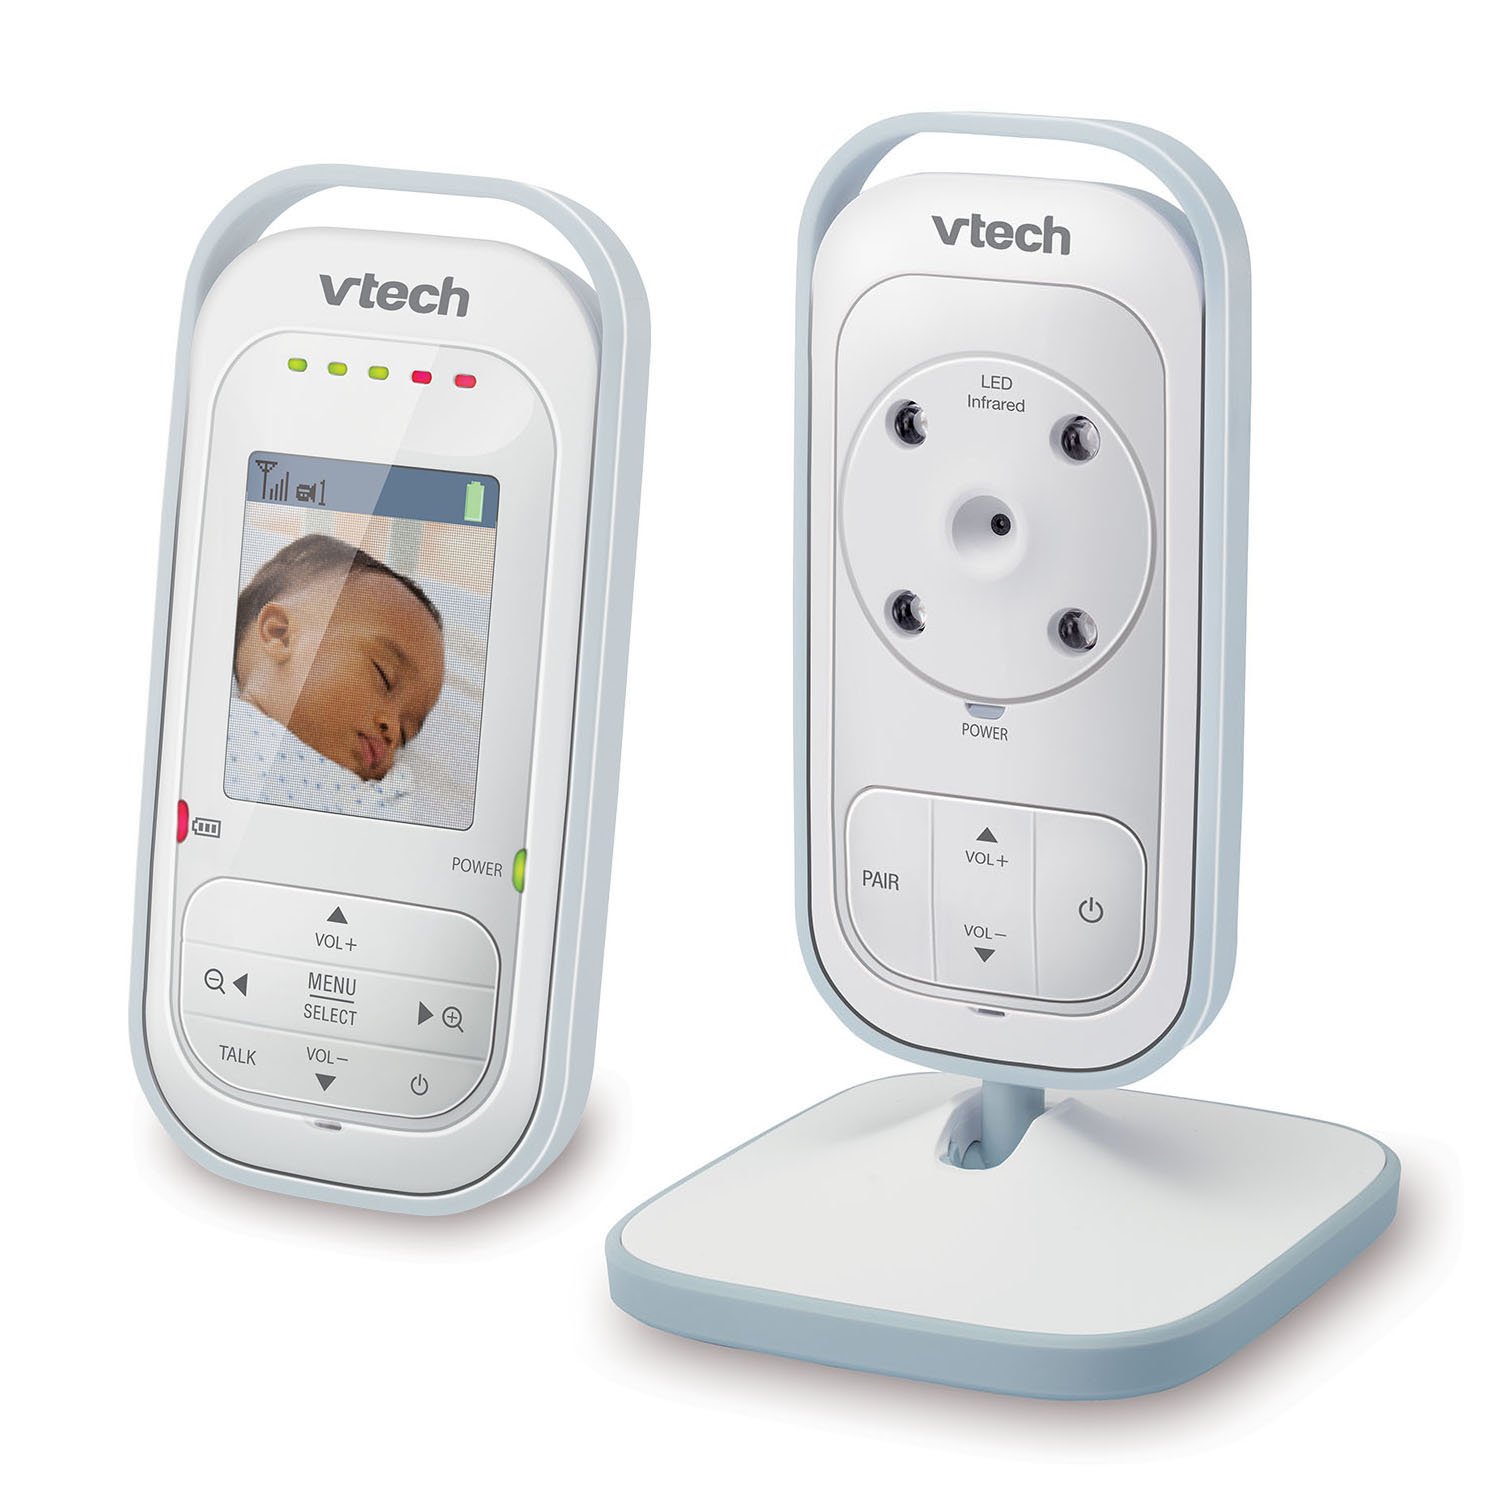 VTech VM311 Safe & Sound Video Baby Monitor with Night Vision High resolution 2" color LCD screen - image 3 of 16